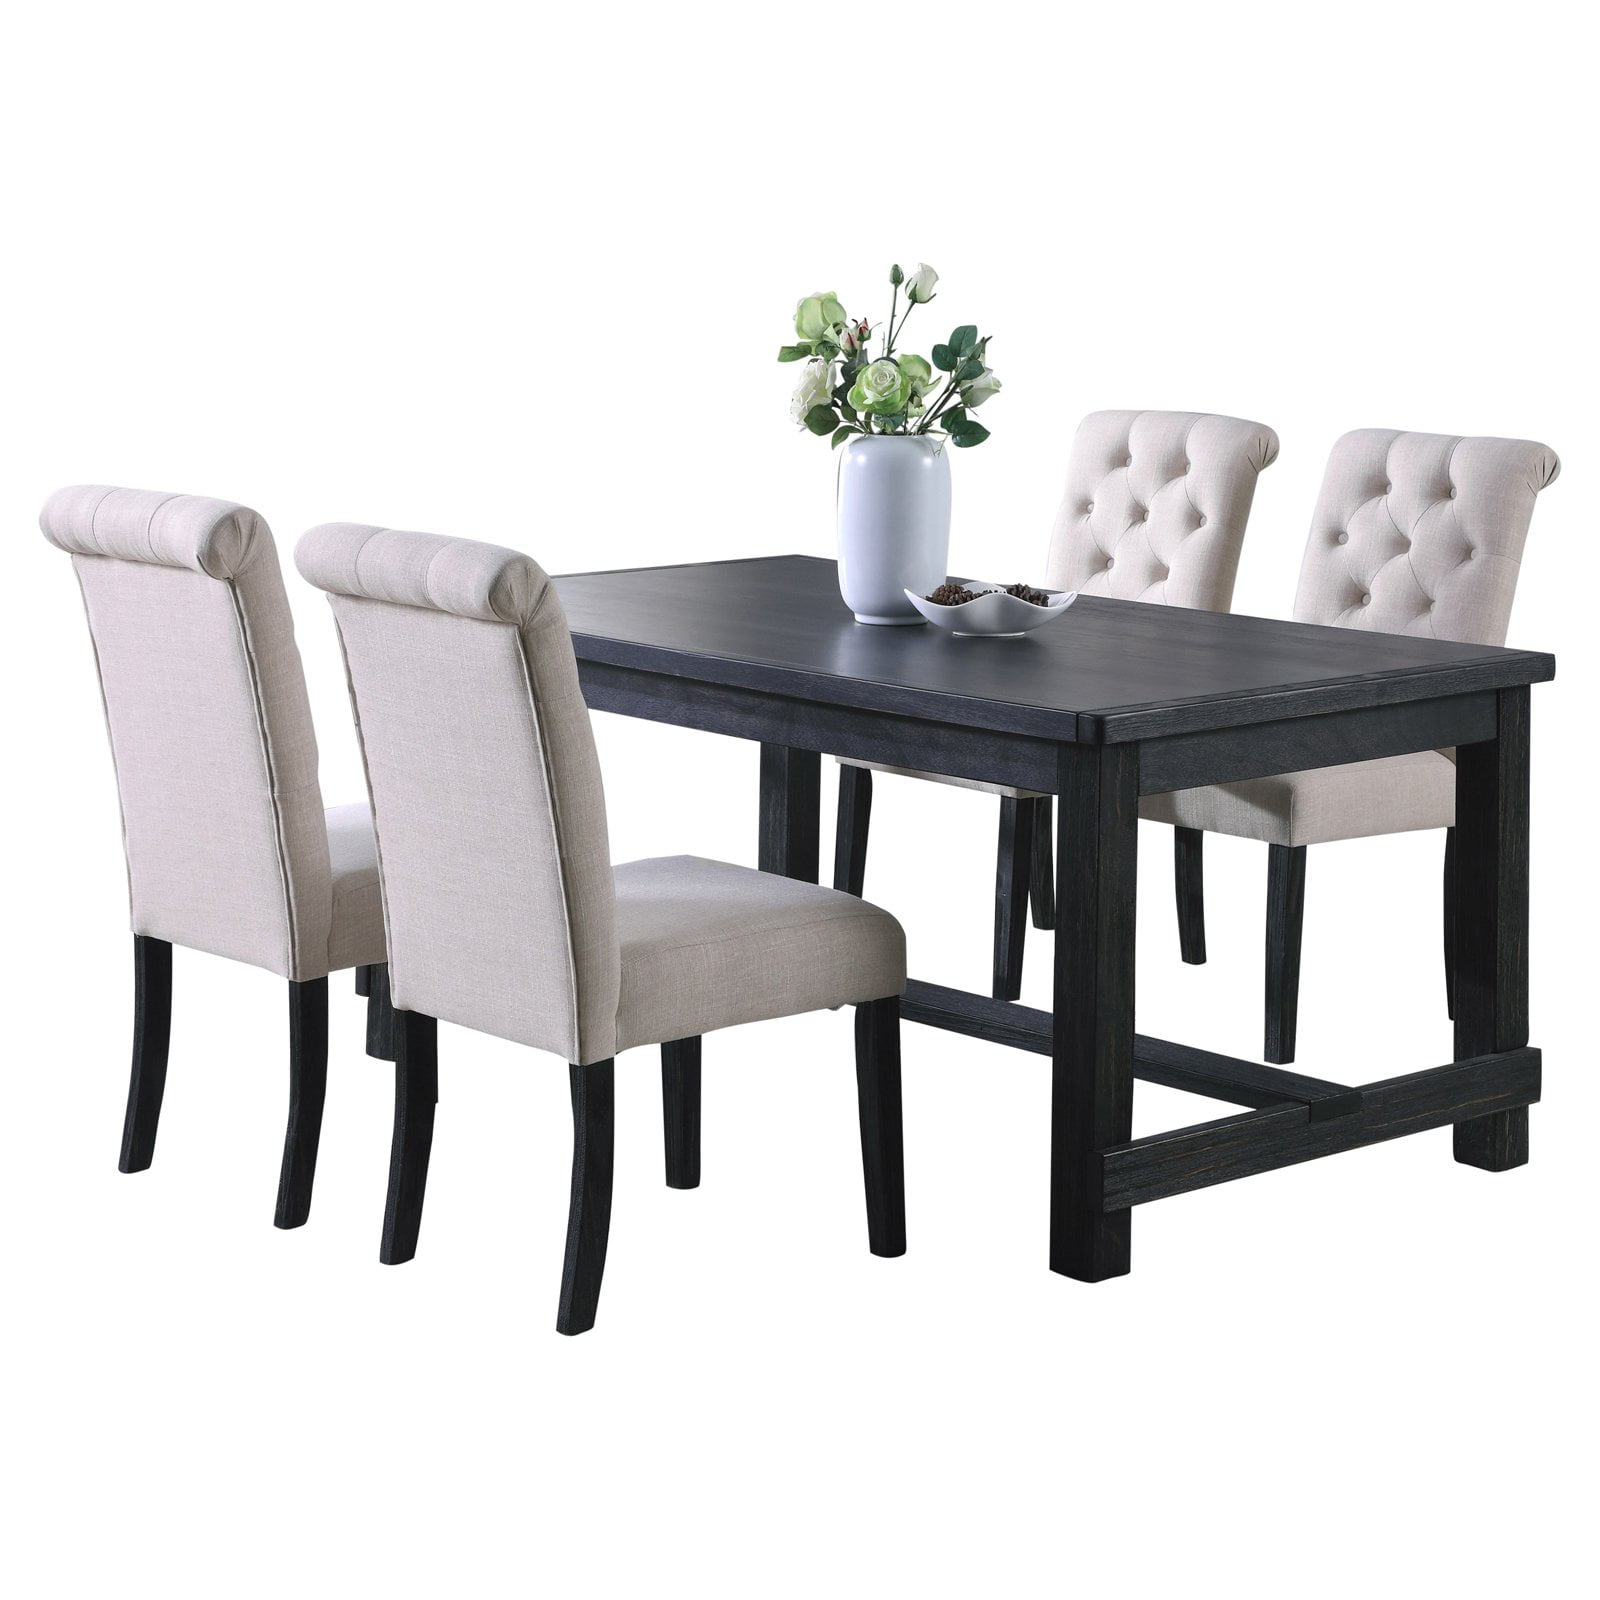 Wood Dining Set Table, Distressed White Dining Room Chairs